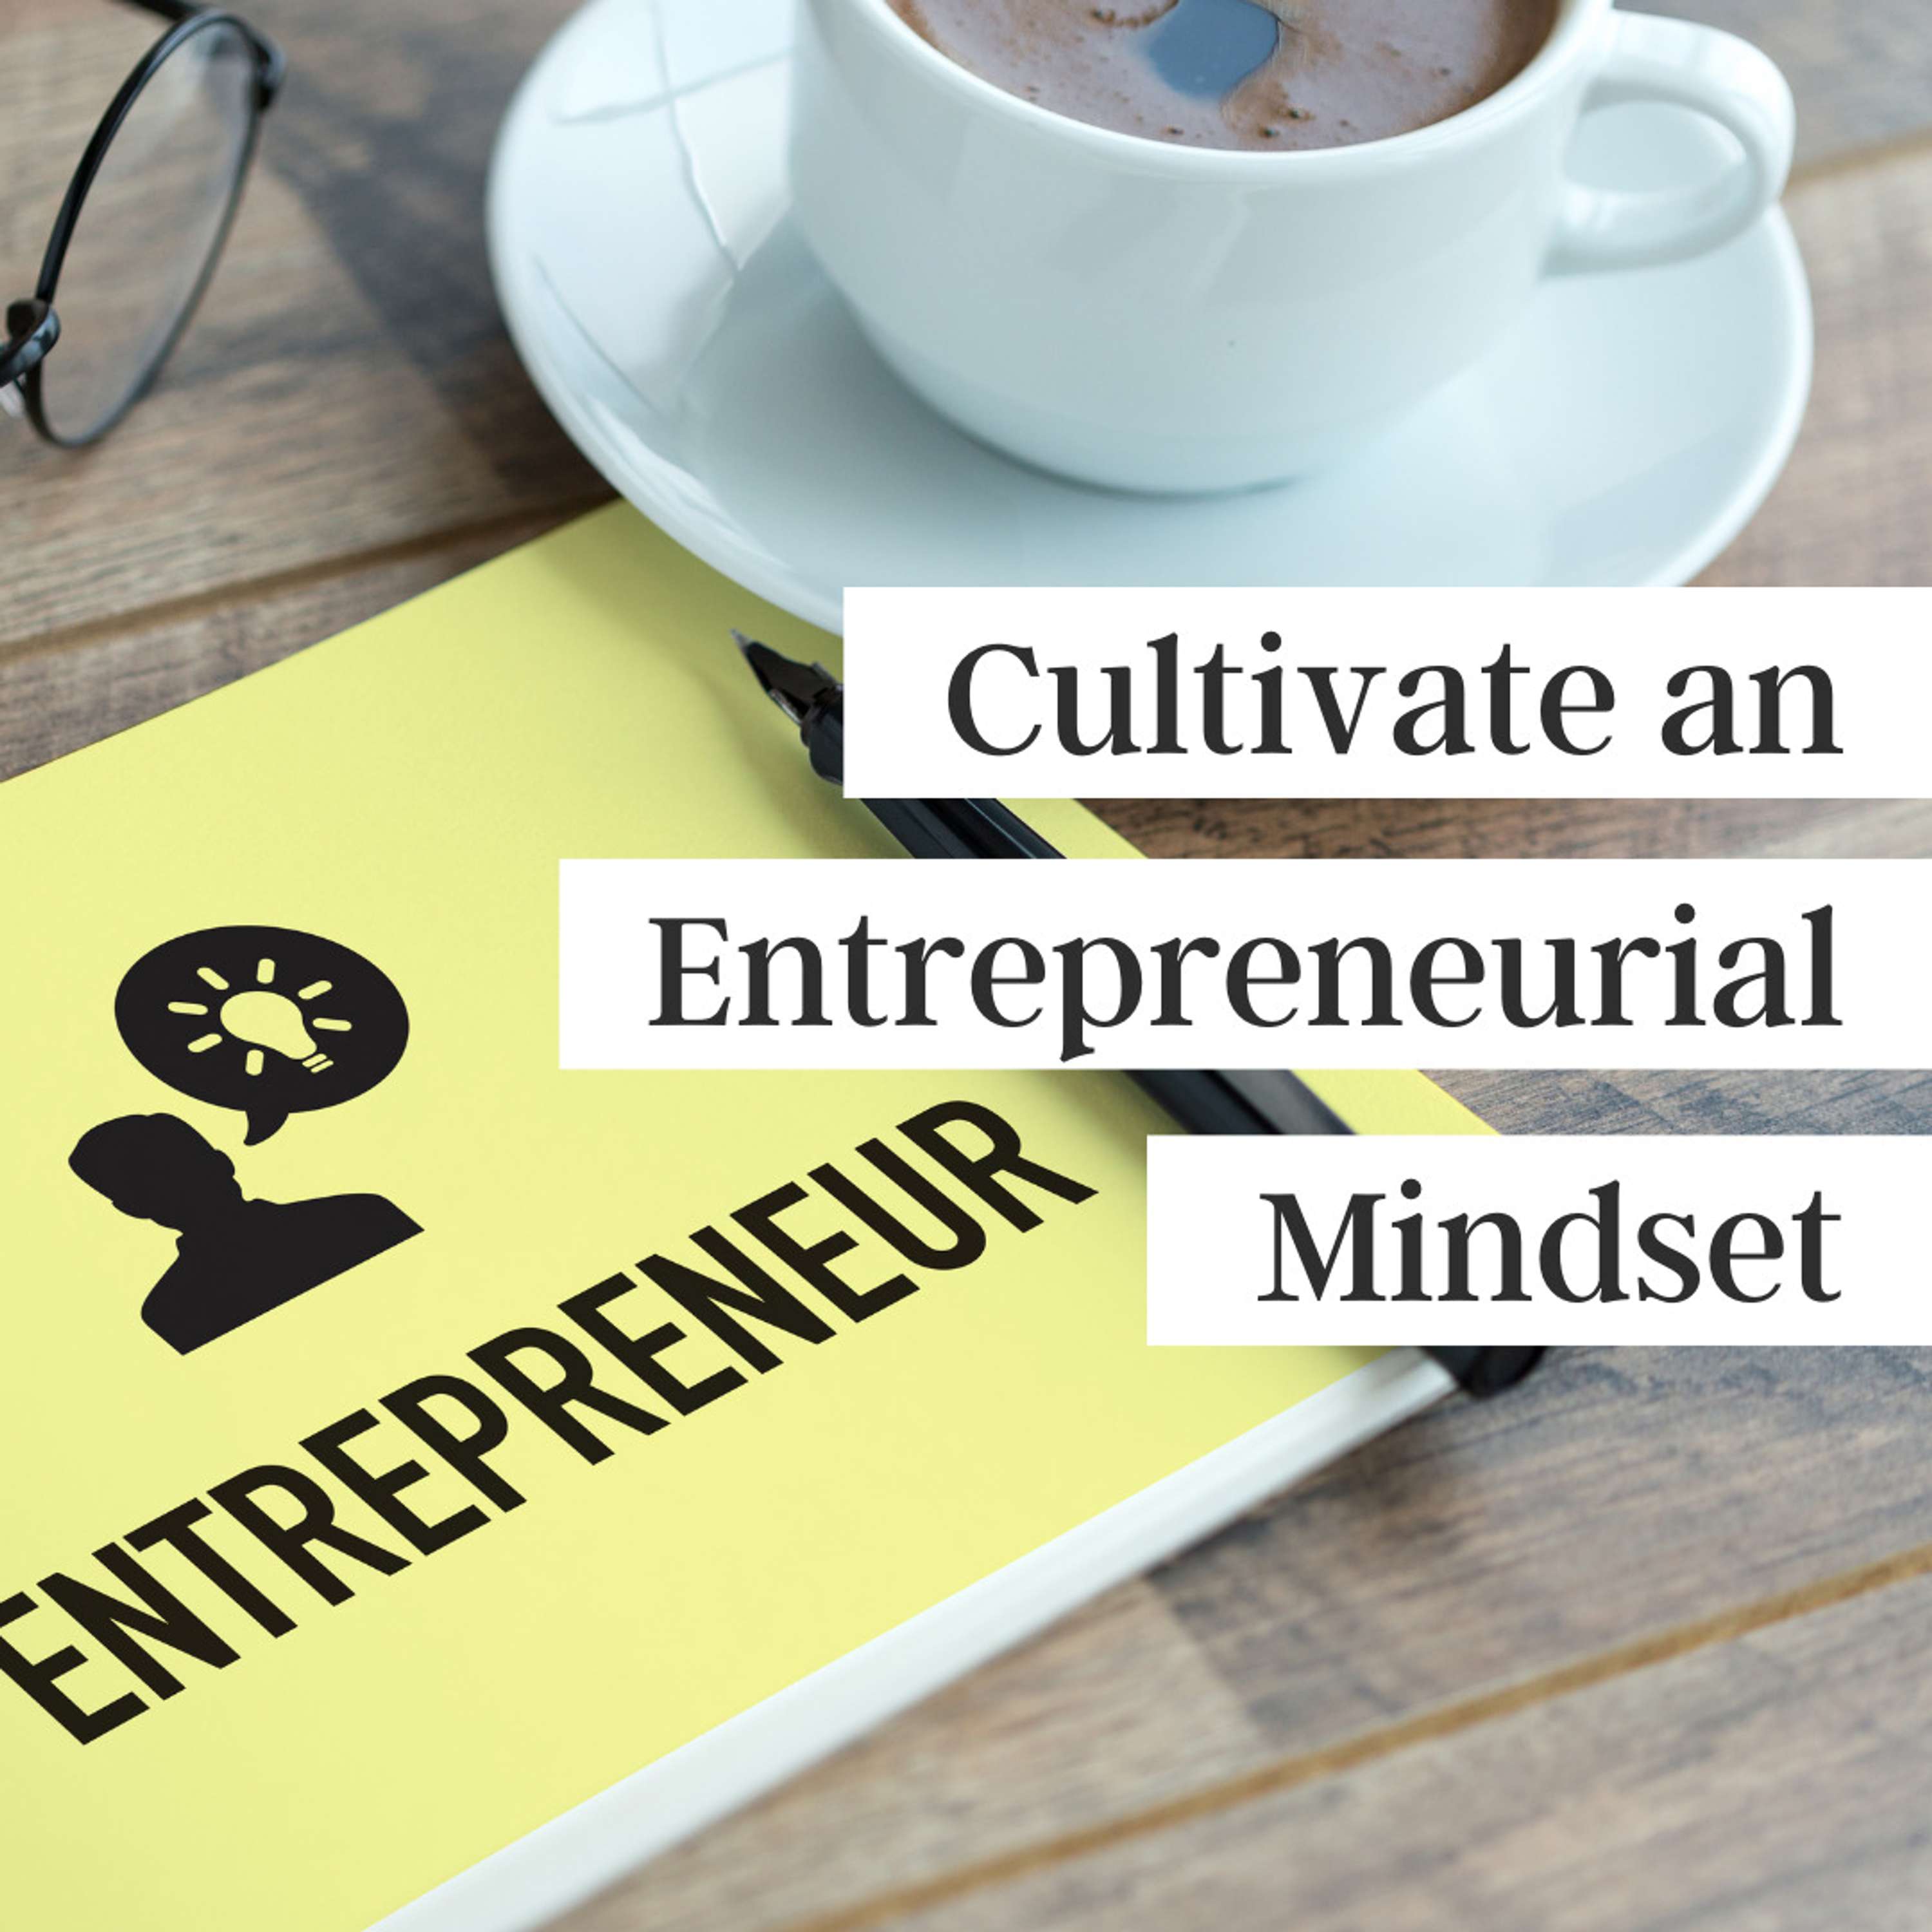 Cultivate an Entrepreneurial Mindset